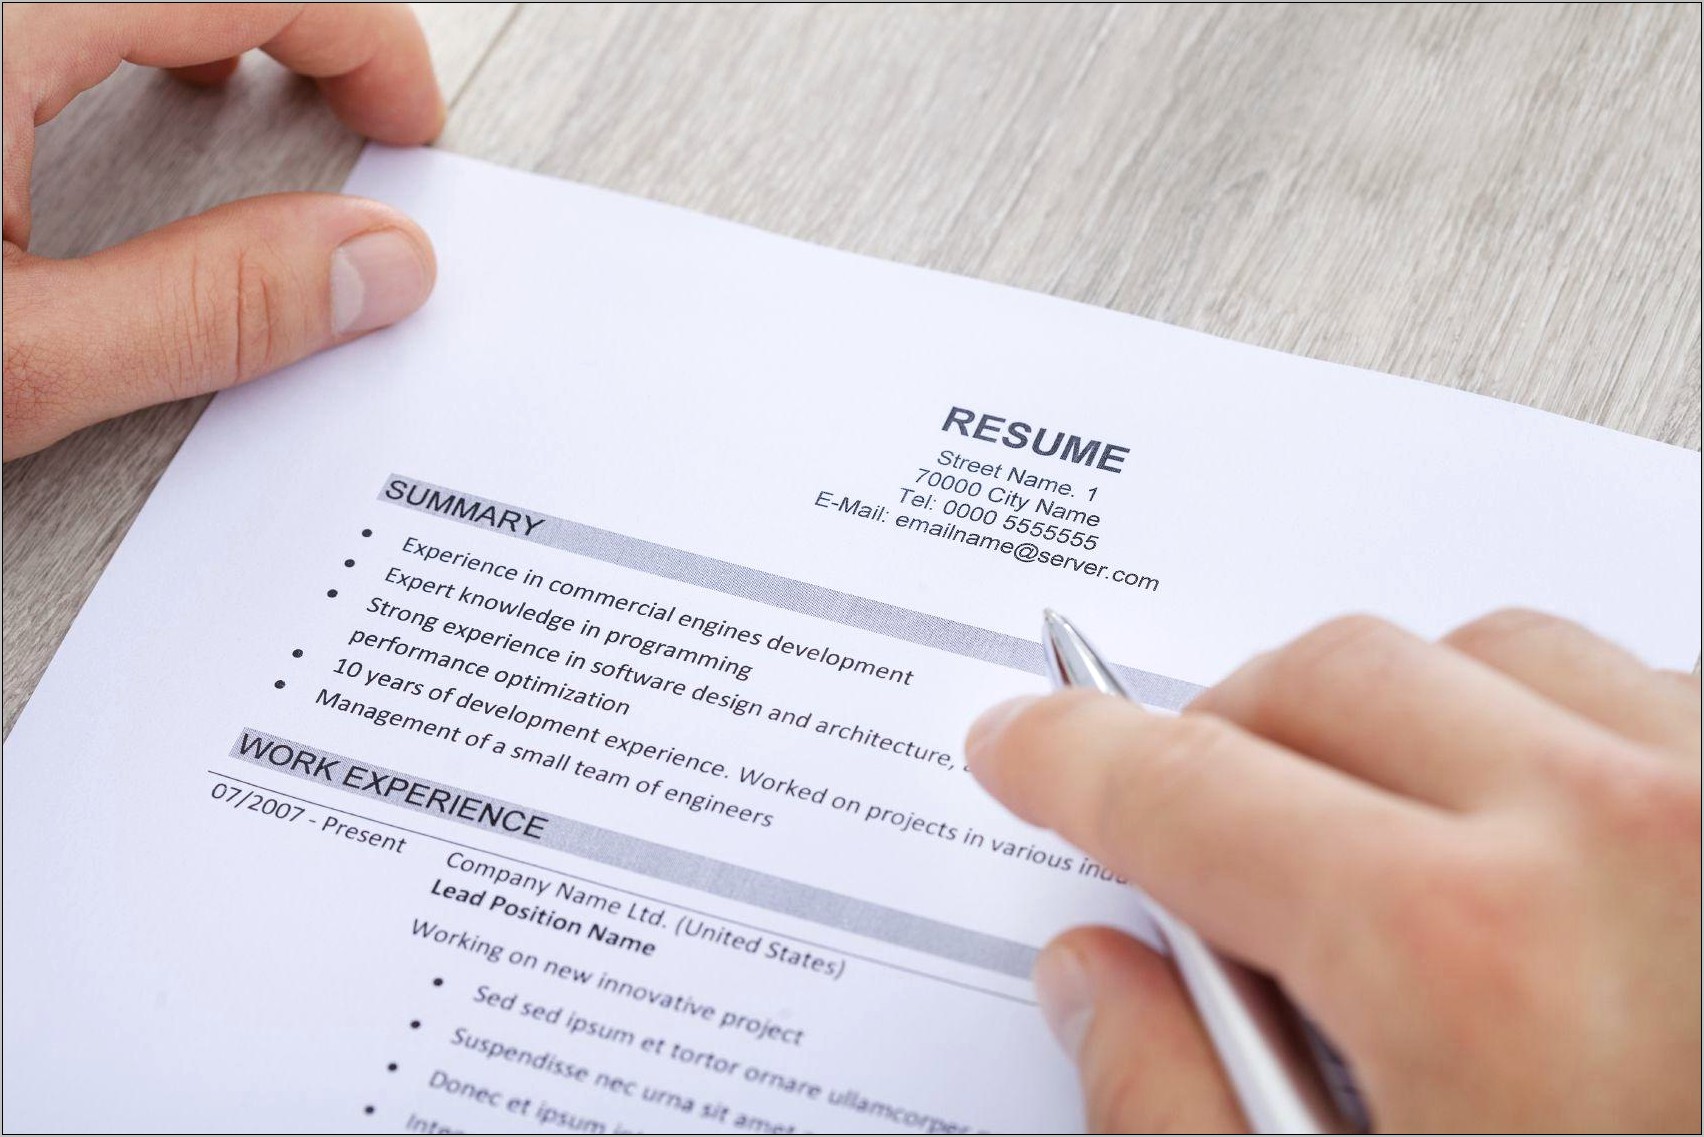 Experience Examples To Put On A Resume